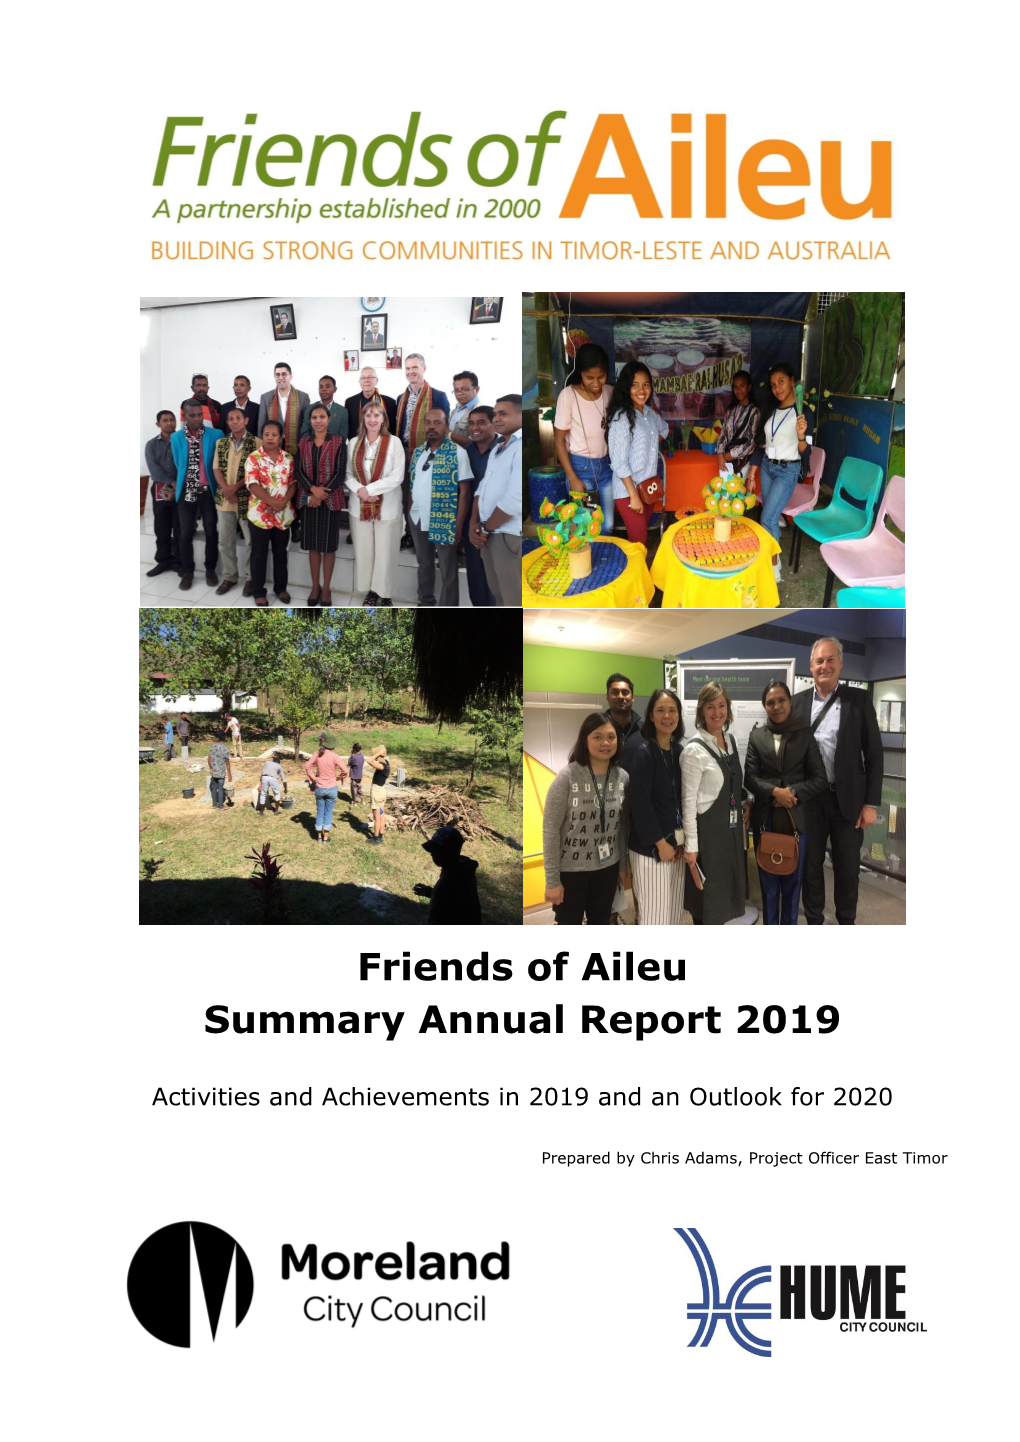 Friends of Aileu Summary Annual Report 2019